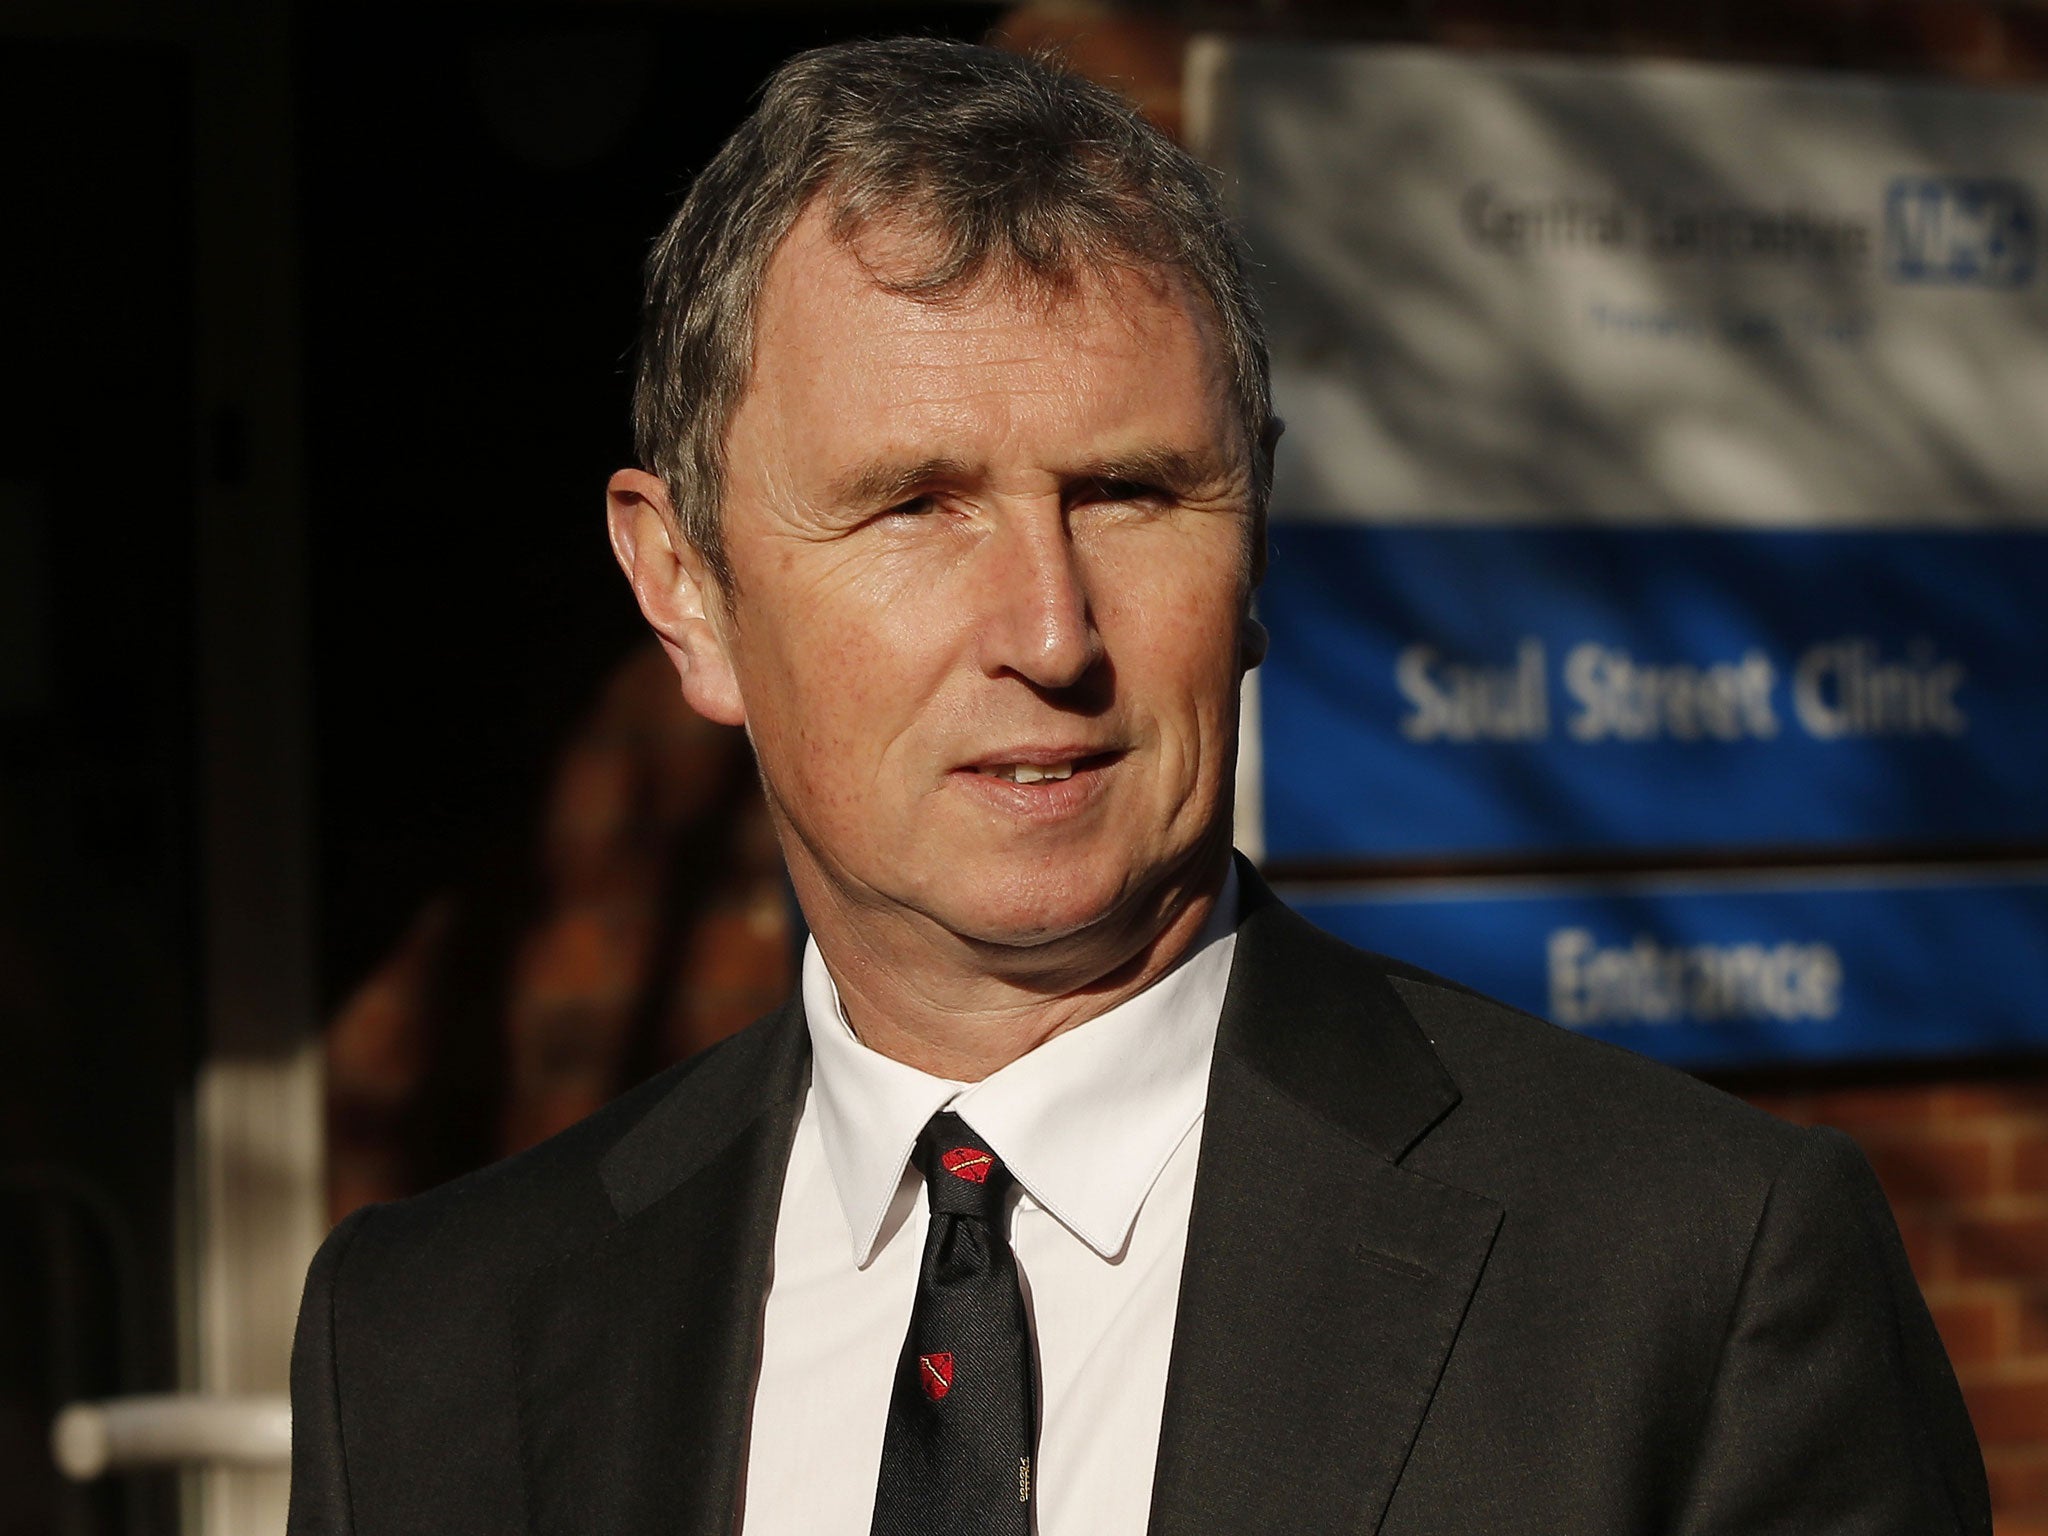 British Conservative MP and former deputy Speaker of the House of Commons, Nigel Evans, arrives at Preston Crown Court on 10 March, 2014